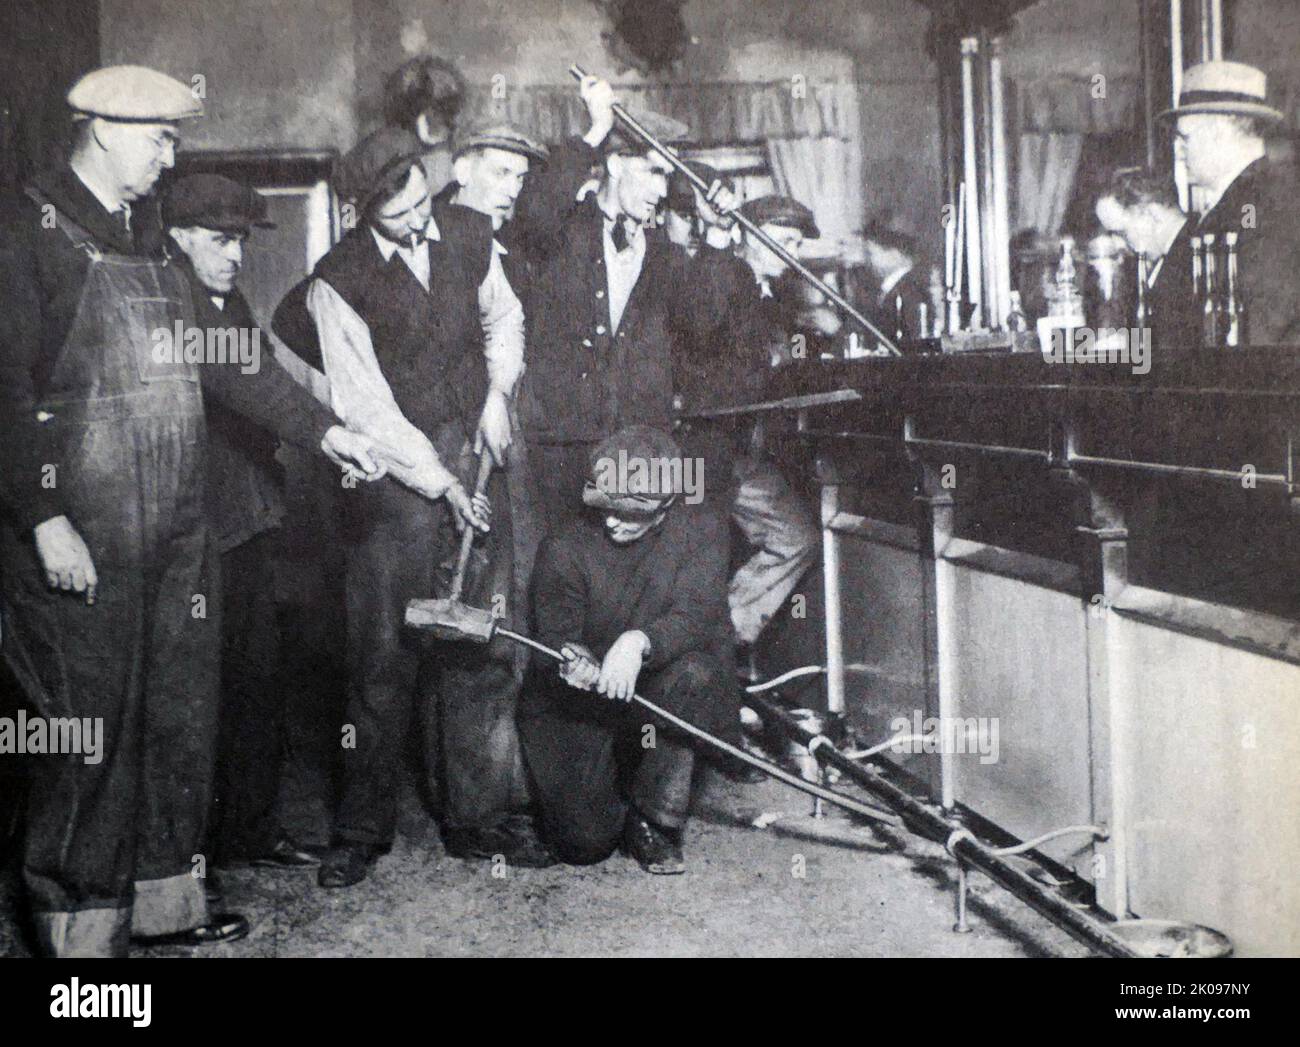 Newspaper report of the violation of the Prohibition Law in New Jersey, 1920. Stock Photo